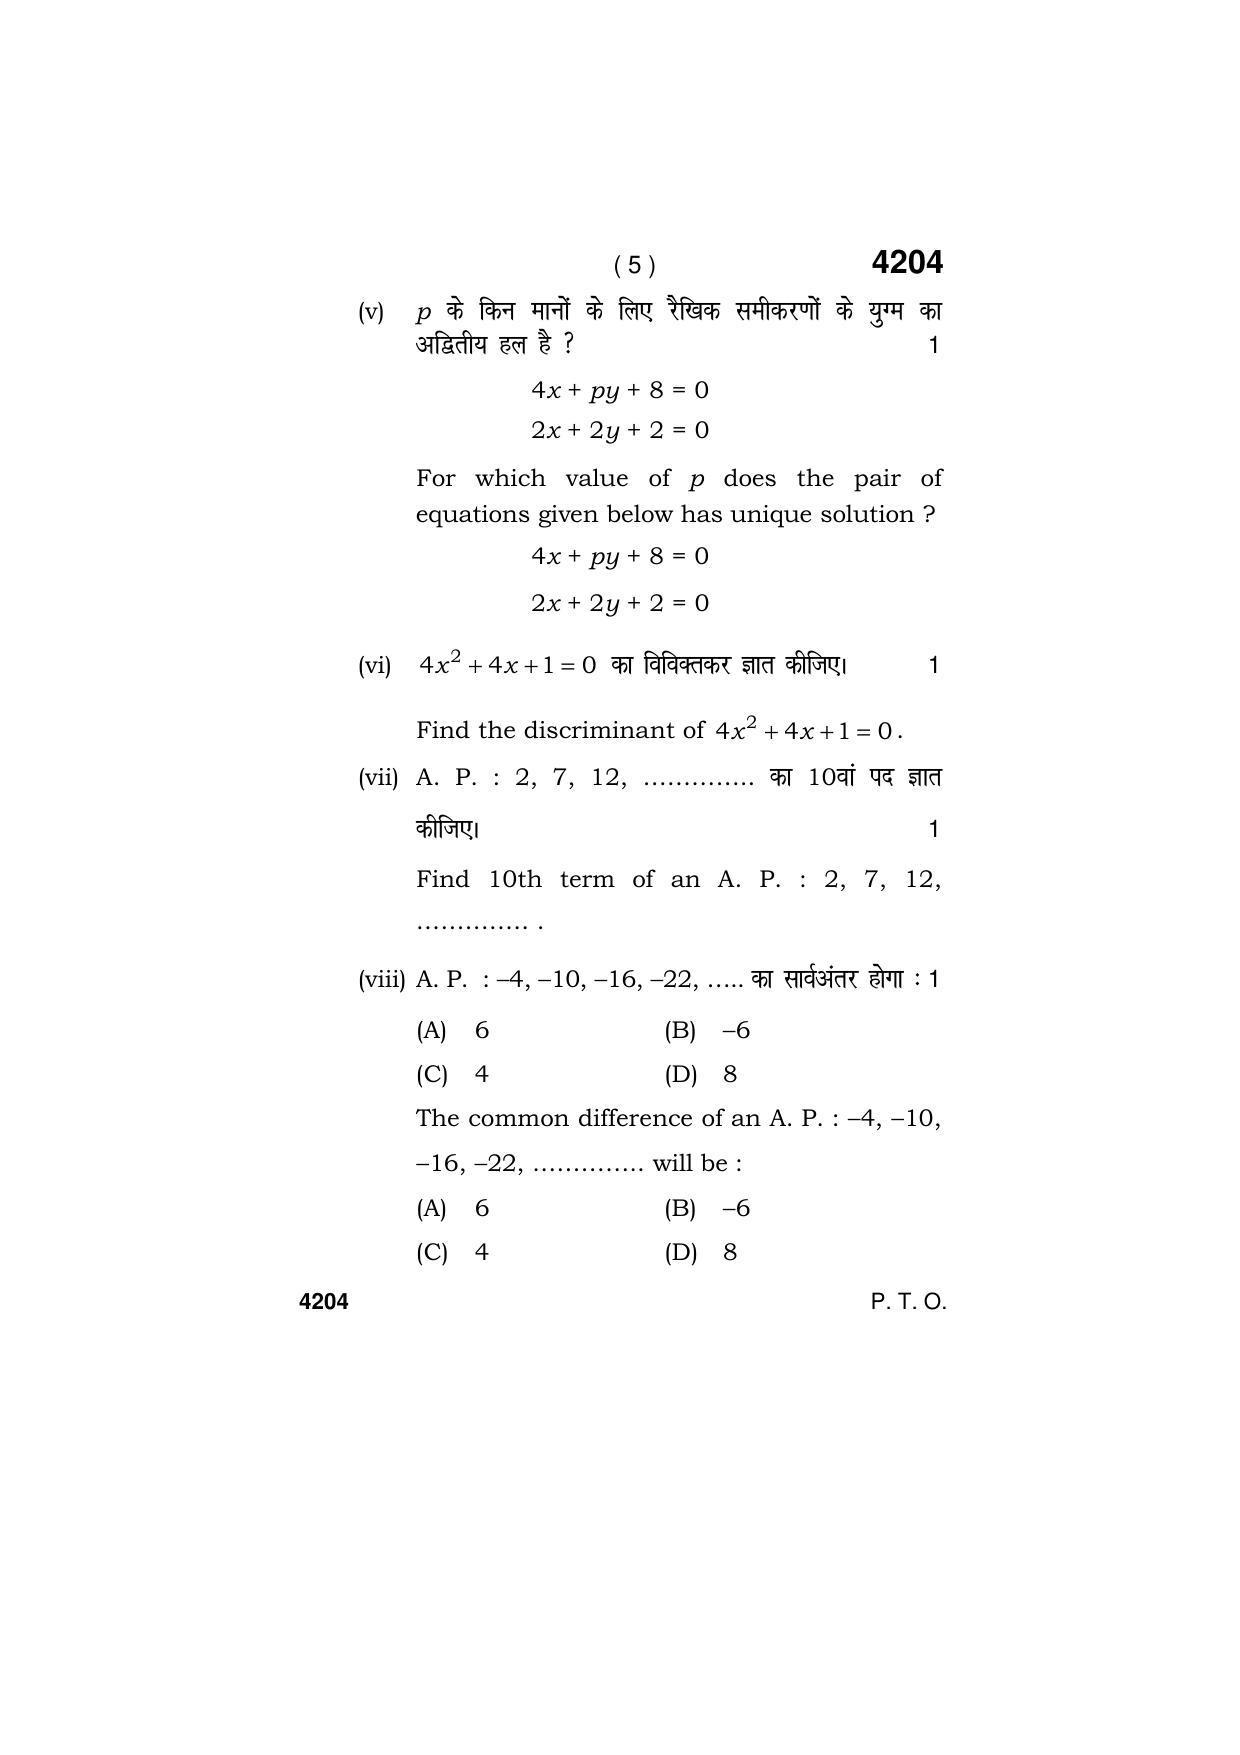 Haryana Board HBSE Class 10 Mathematics (Blind c) 2019 Question Paper - Page 5